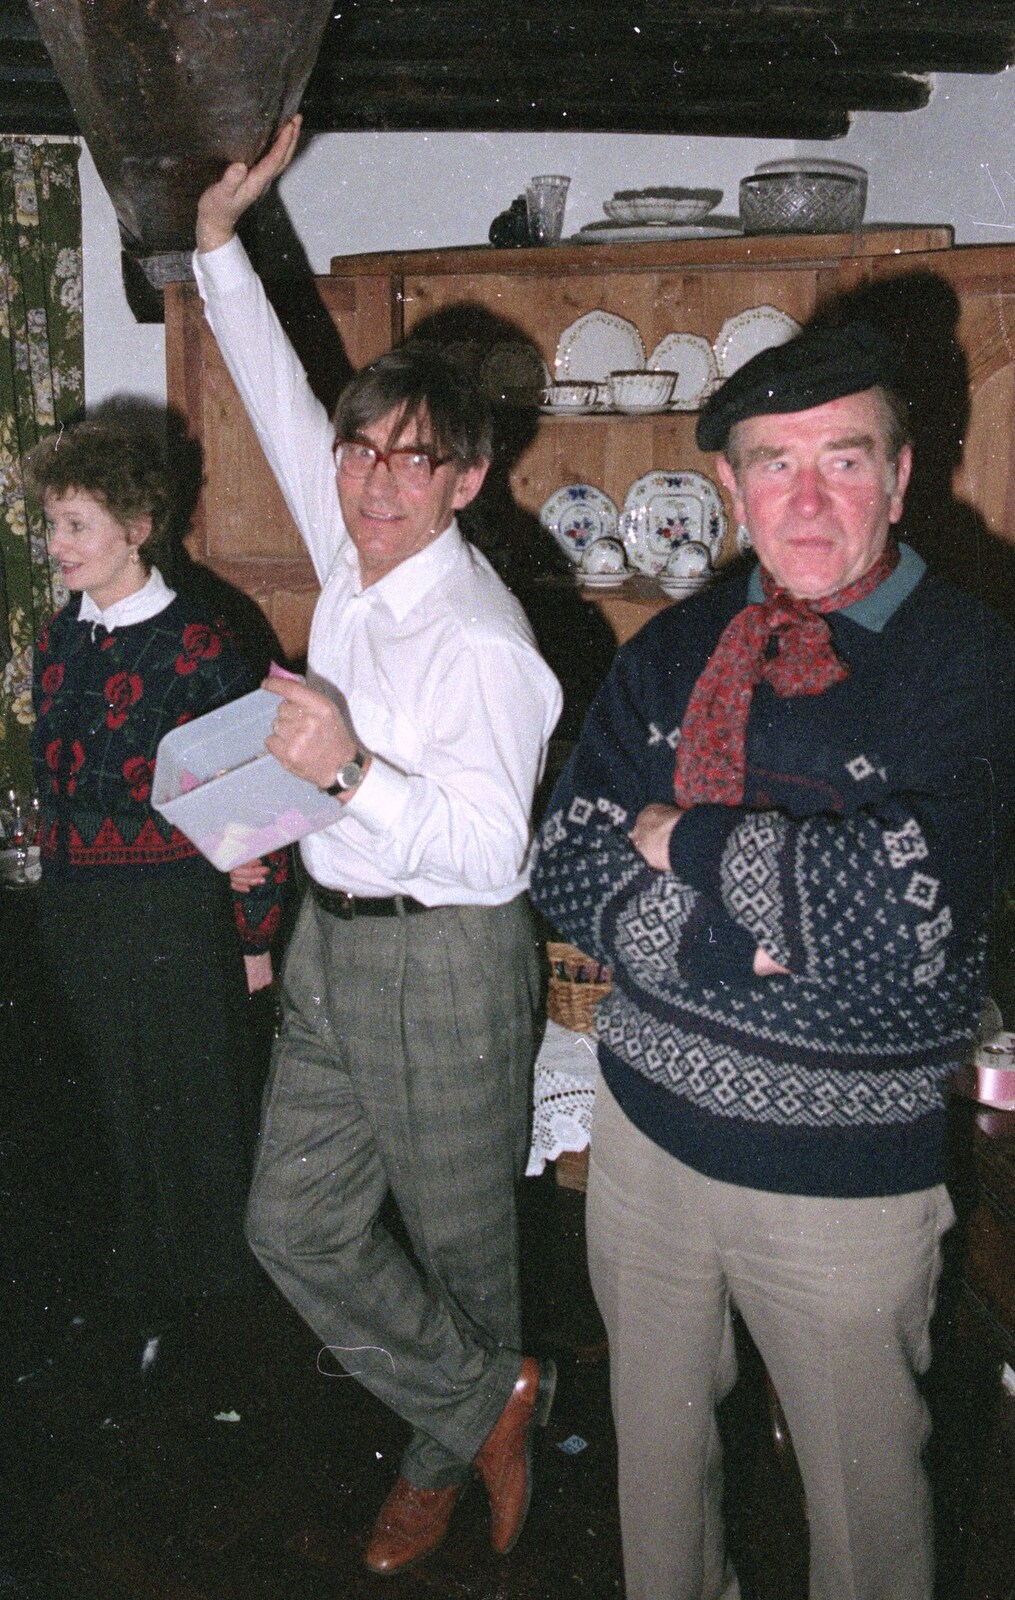 Derek pauses to prop the farmhouse up from Pancake Day in Starston, Norfolk - 27th February 1990